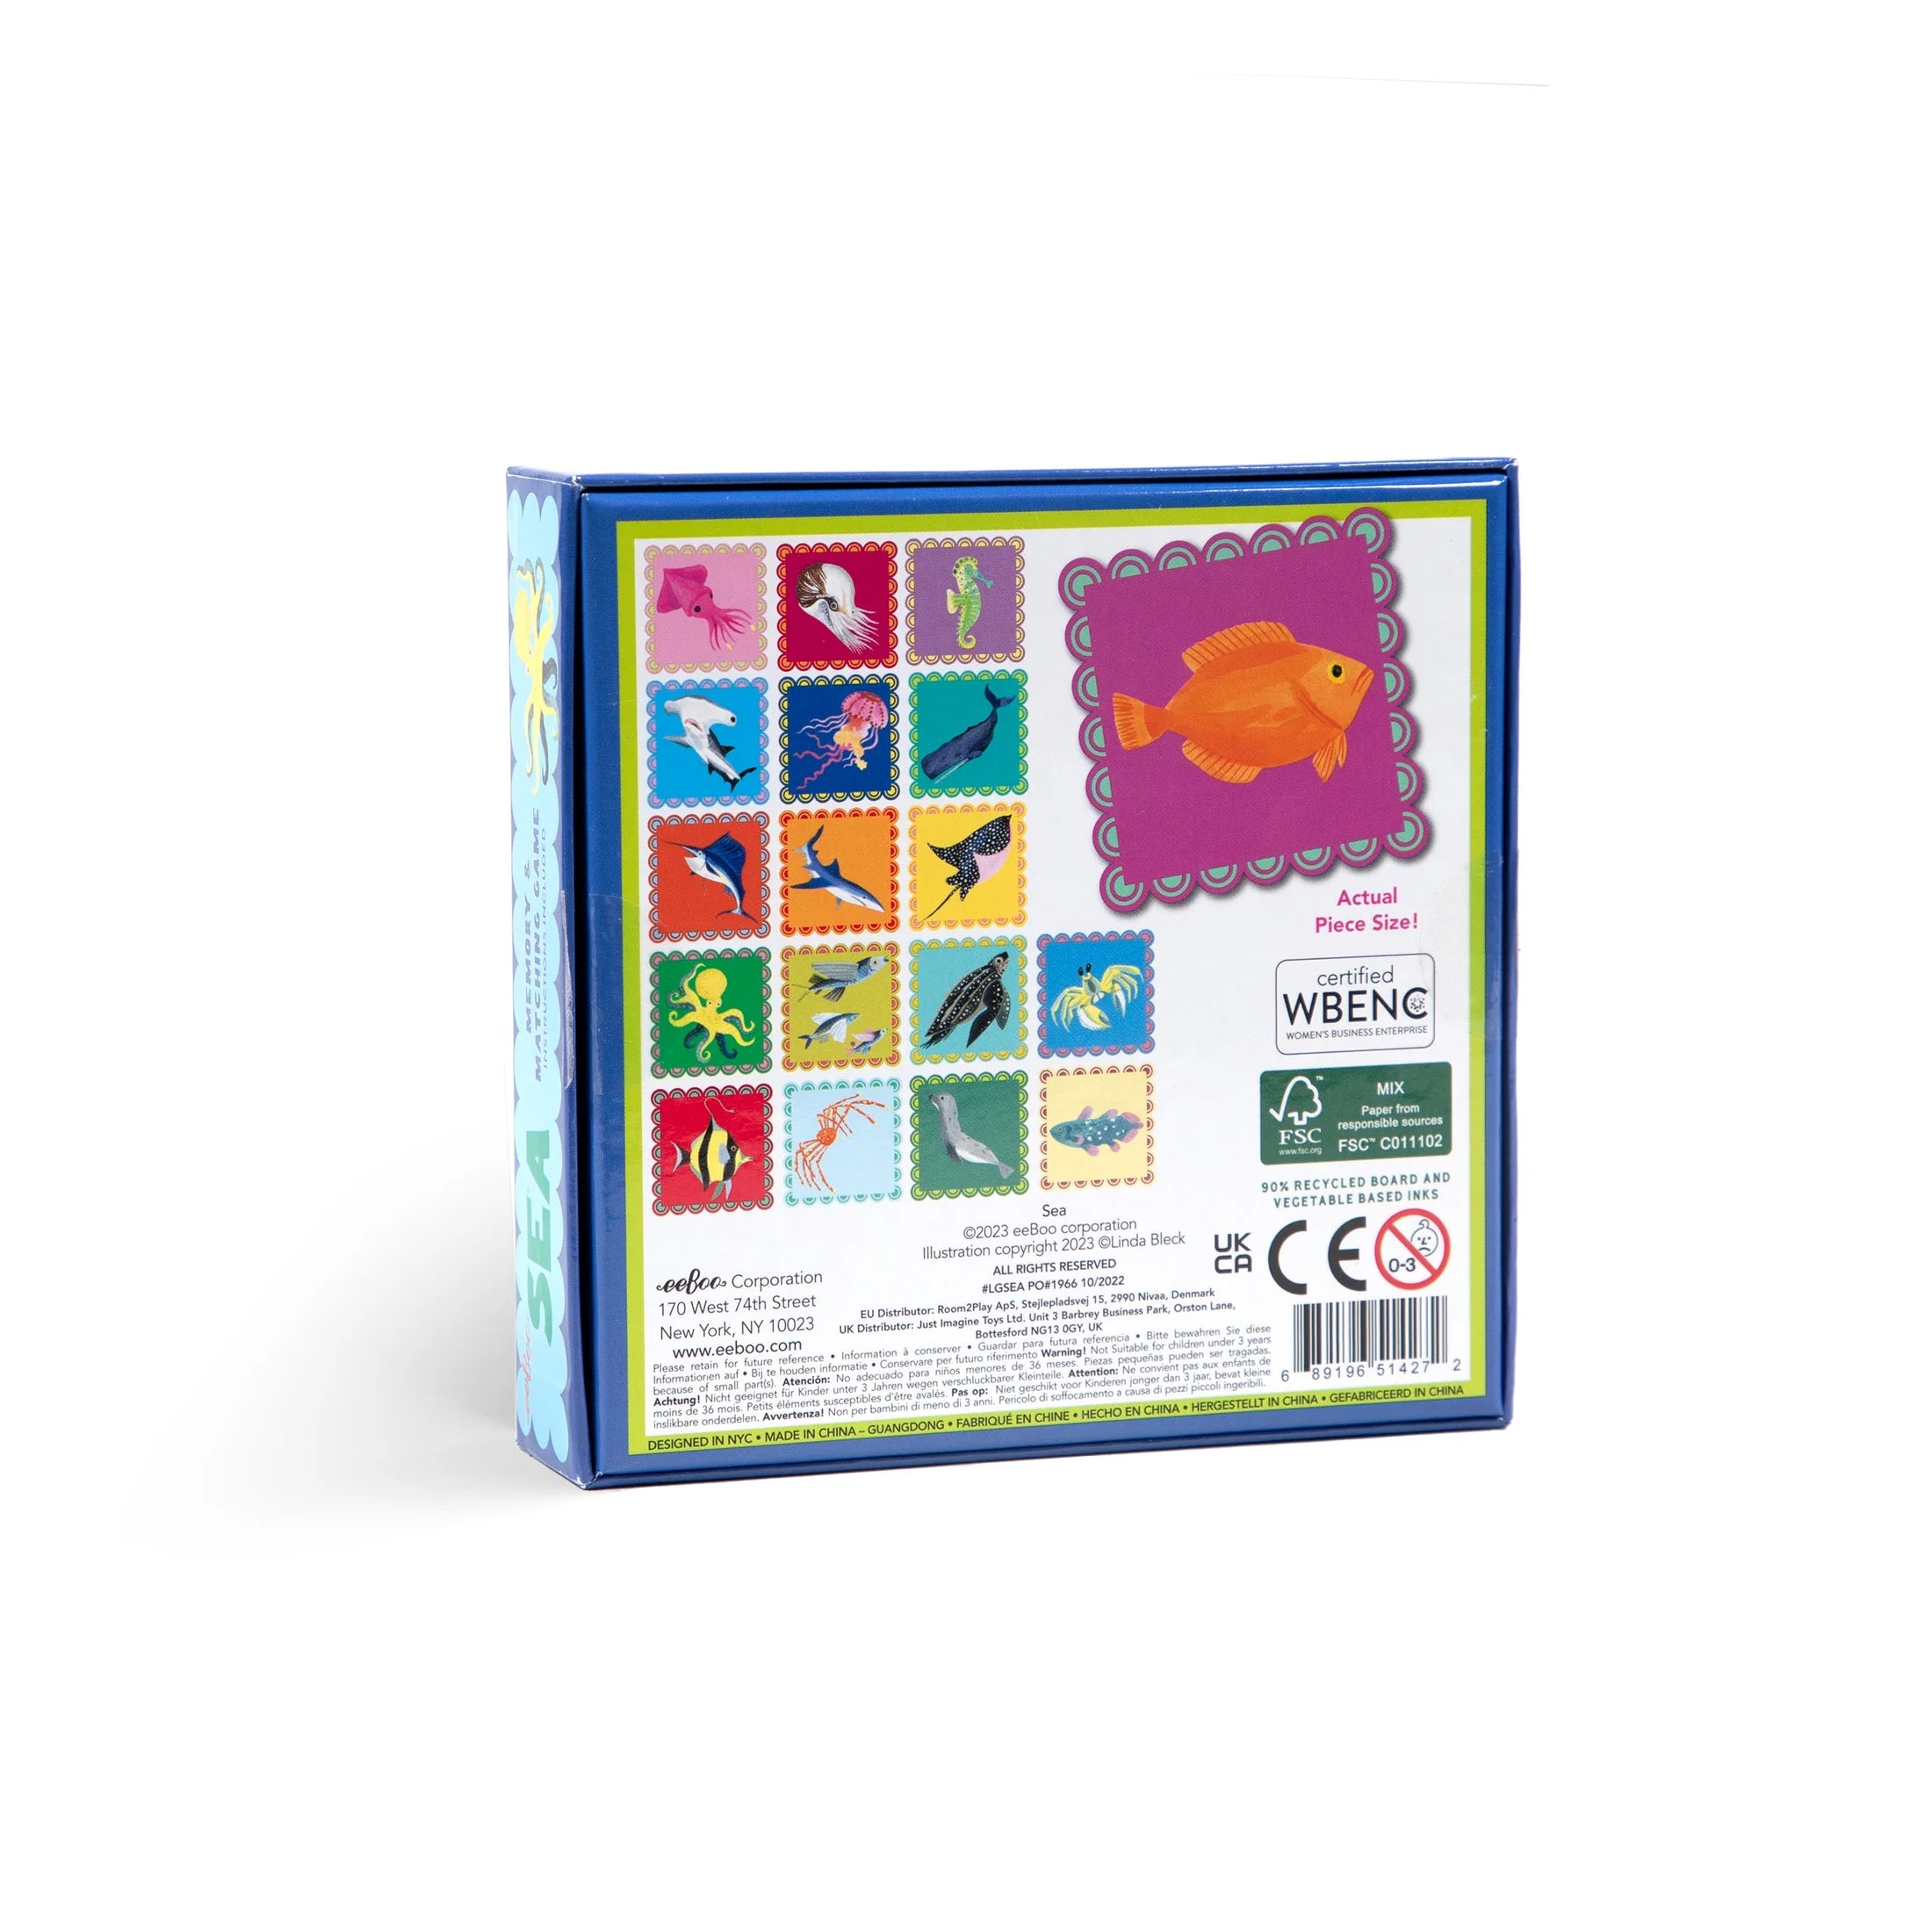 Sea Little Memory & Matching Game